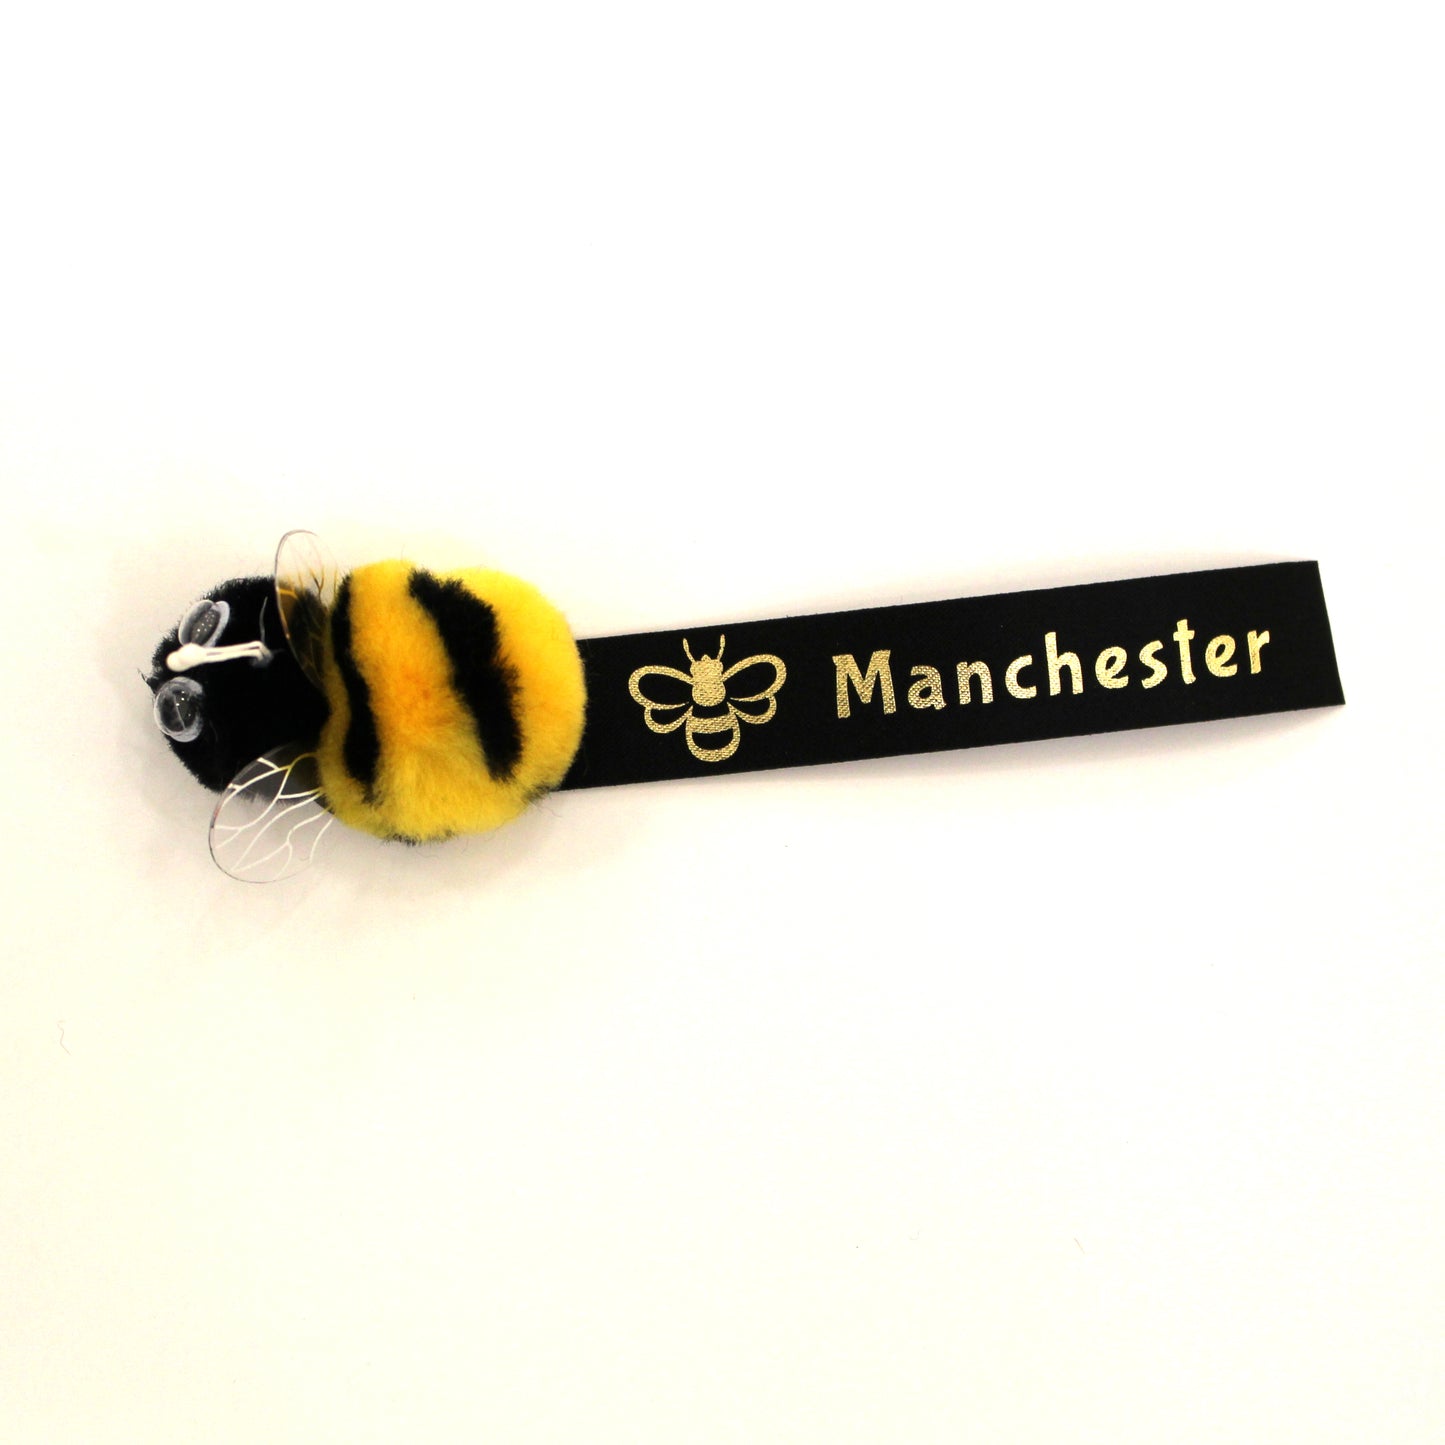 Fuzzy stick on bee with Manchester label